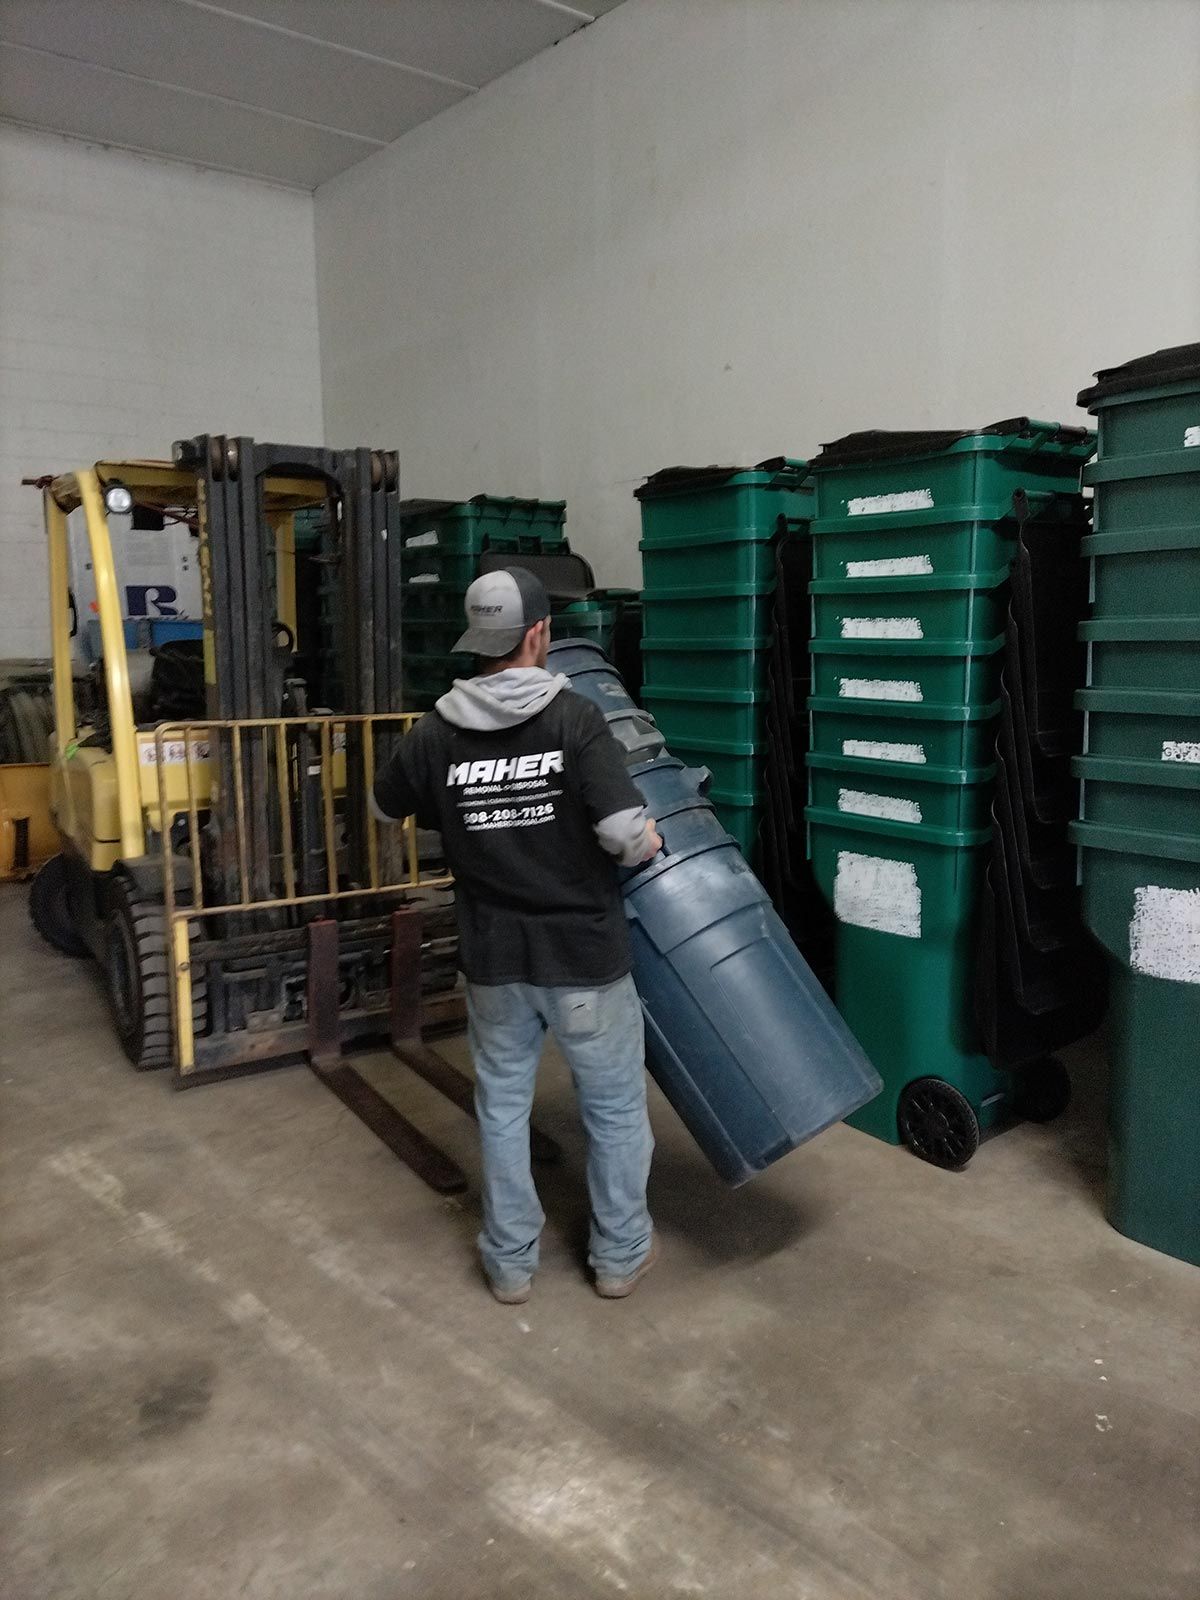 Maher Removal & Disposal has a variety of 64 gallon and 96 gallon trash barrels and bins for garbage collection services.